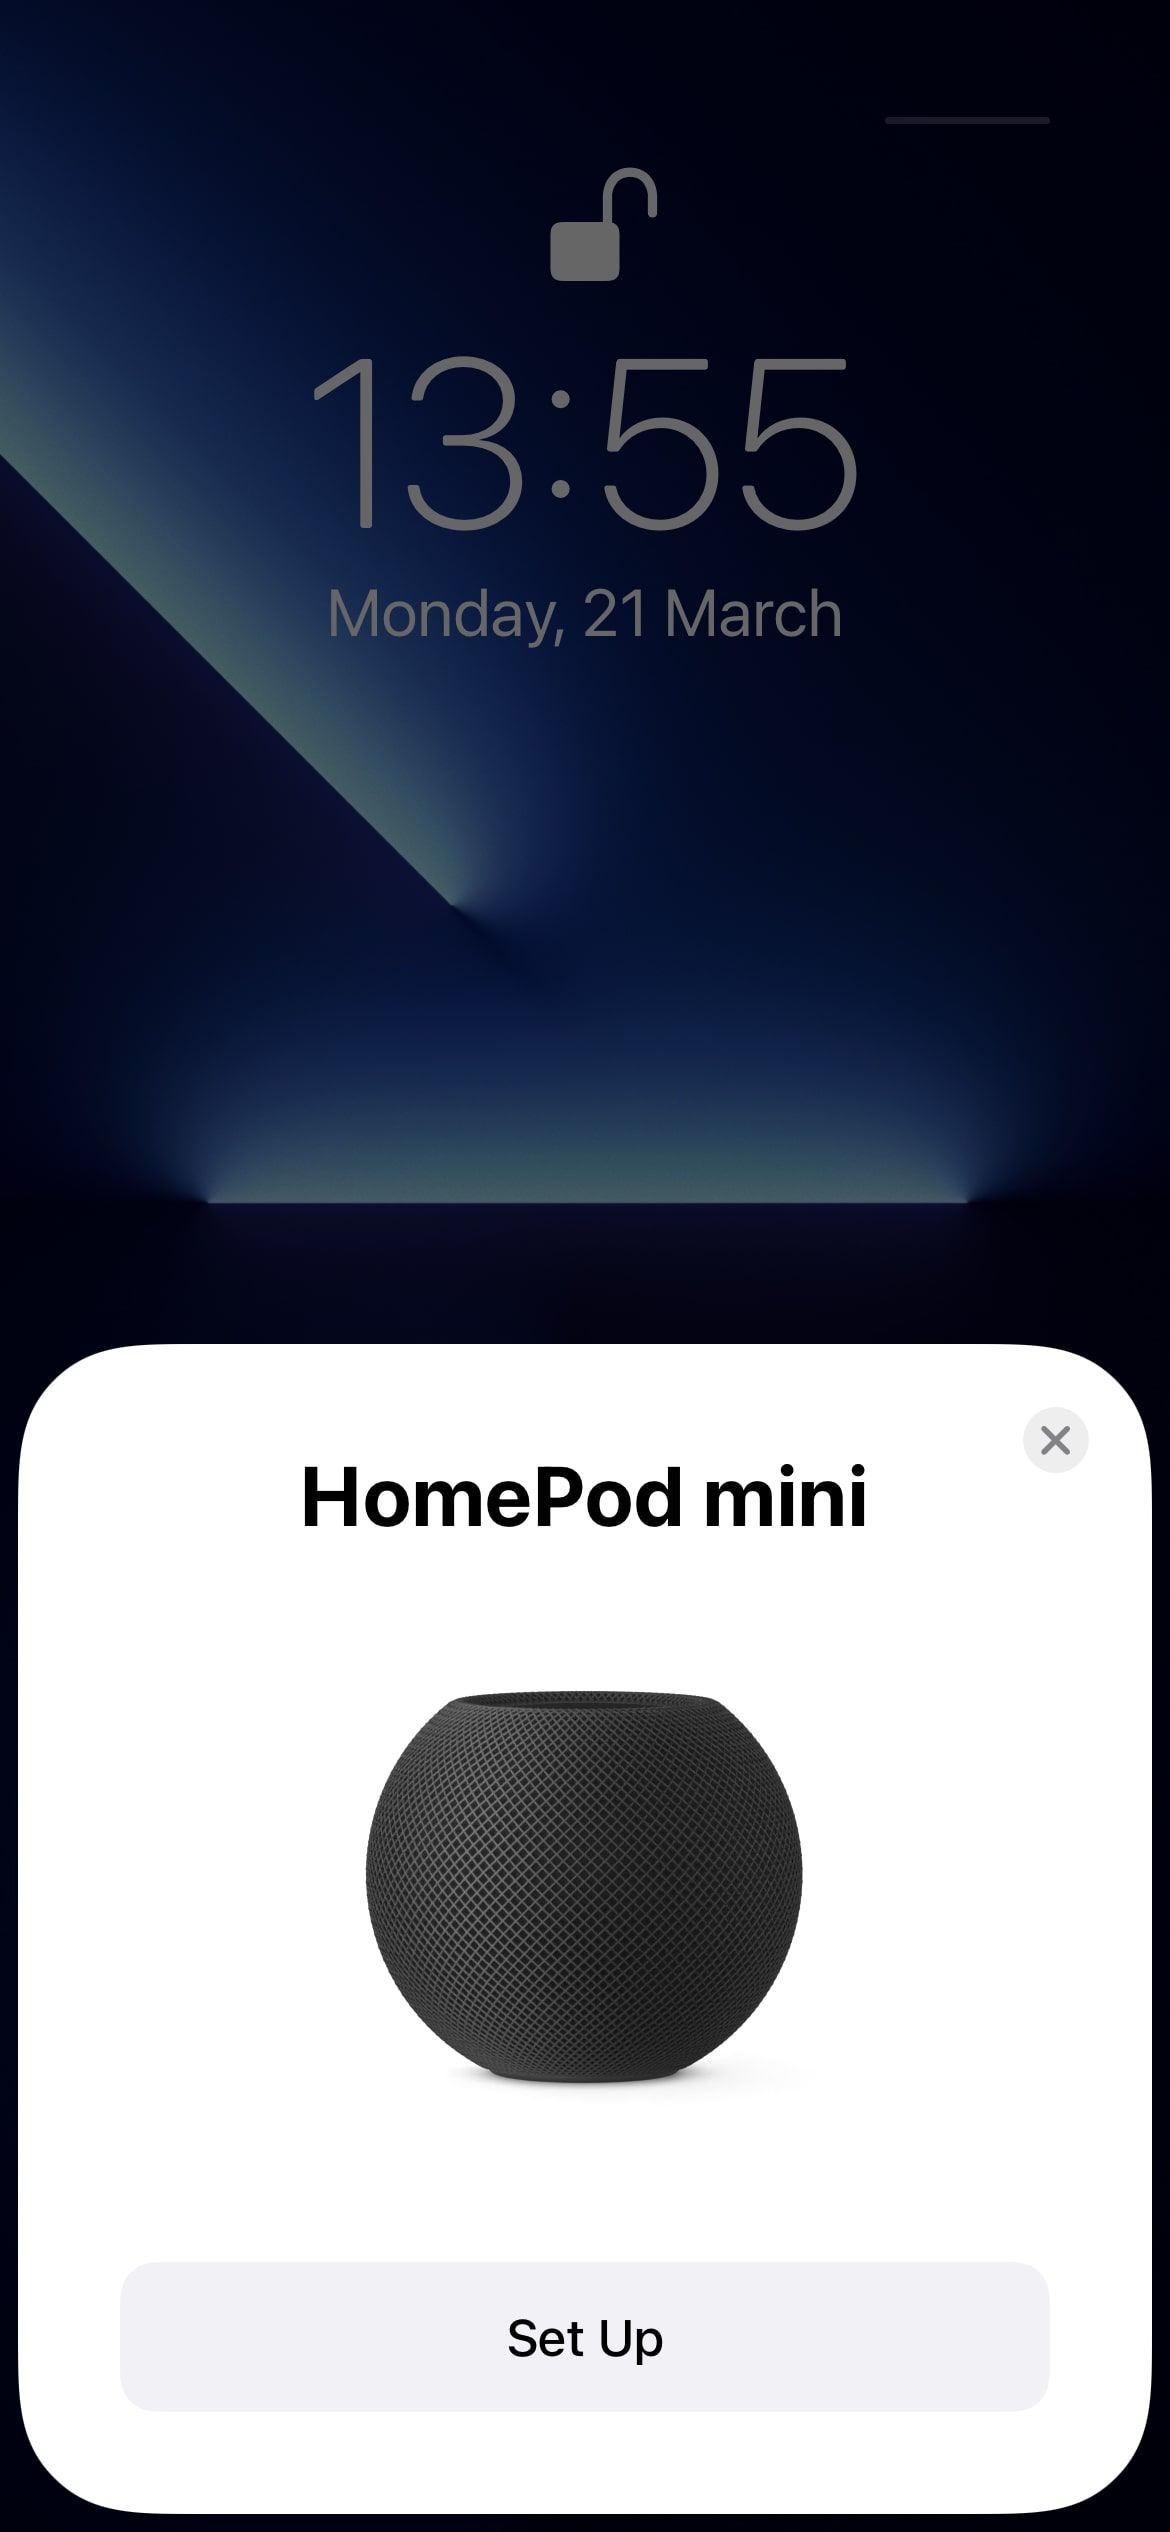 How to Set Up a HomePod Mini